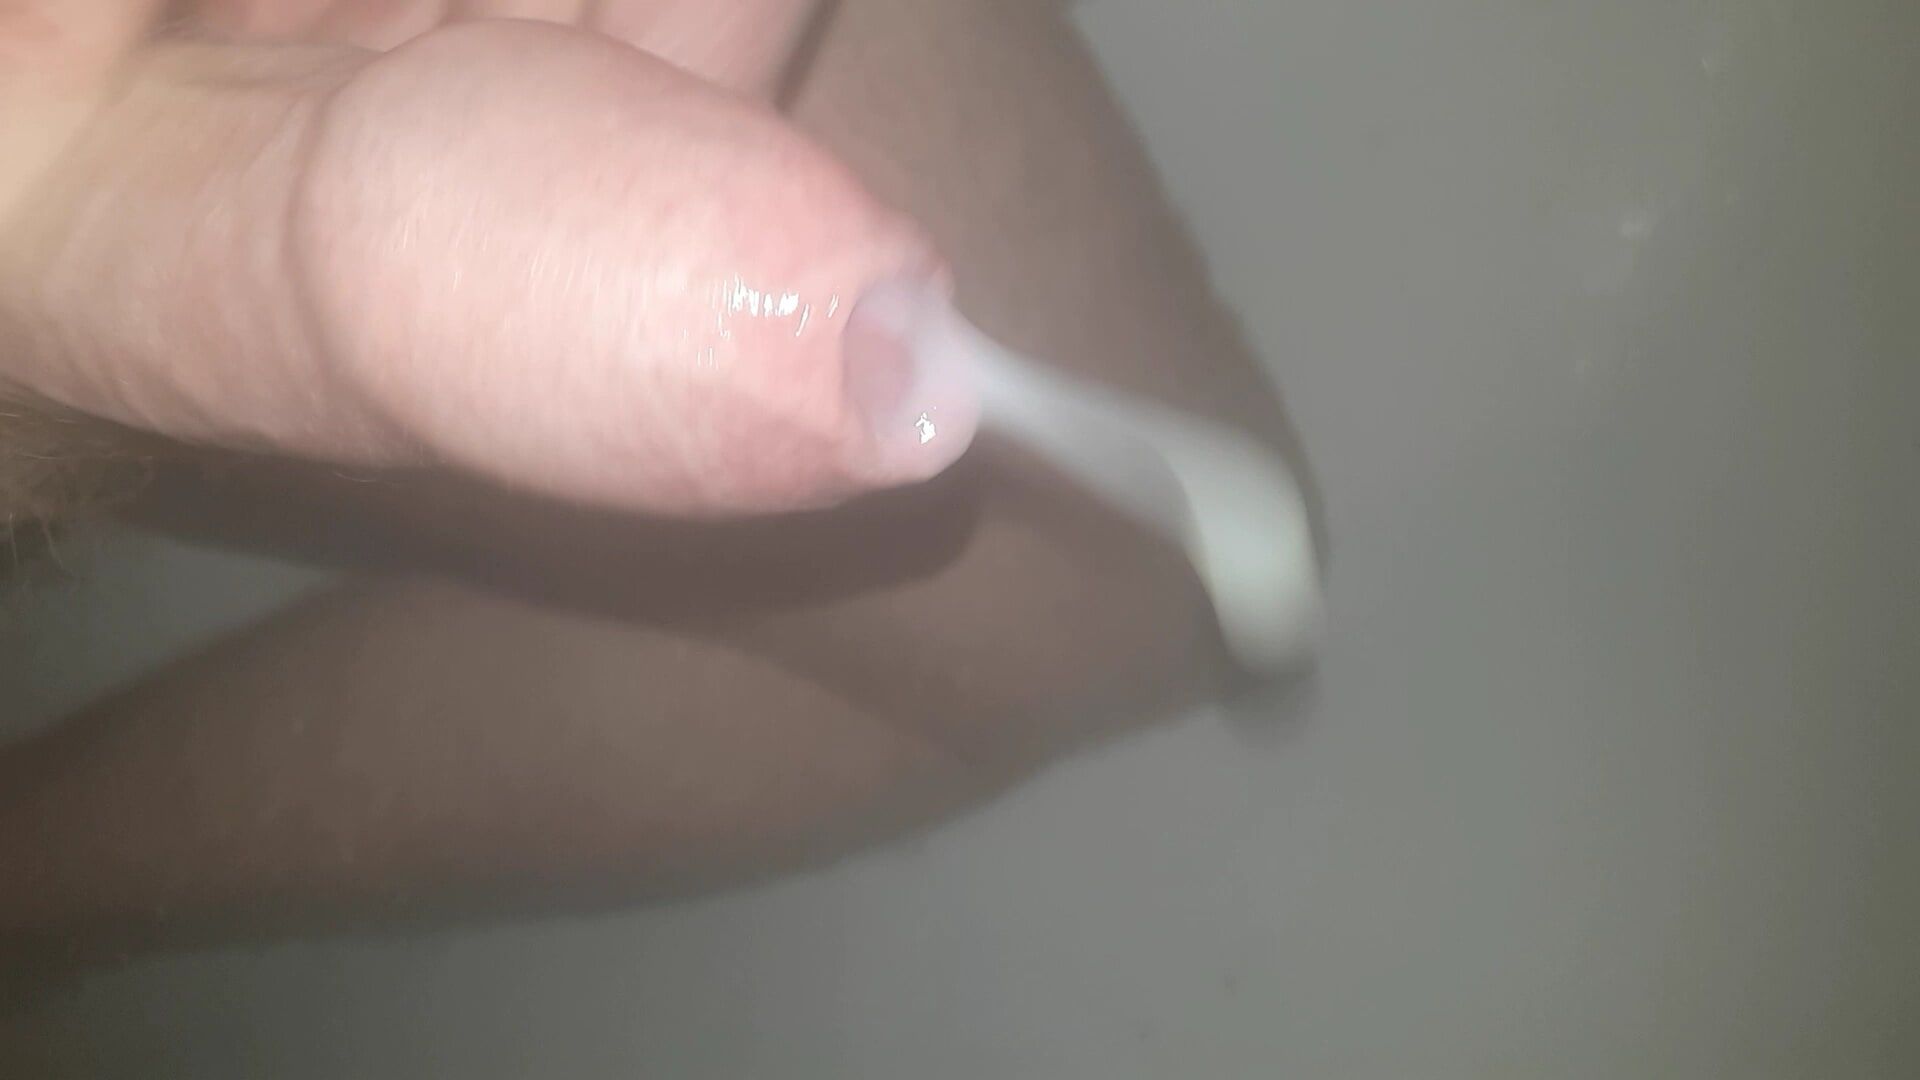 my uncut cock shooting its load #4